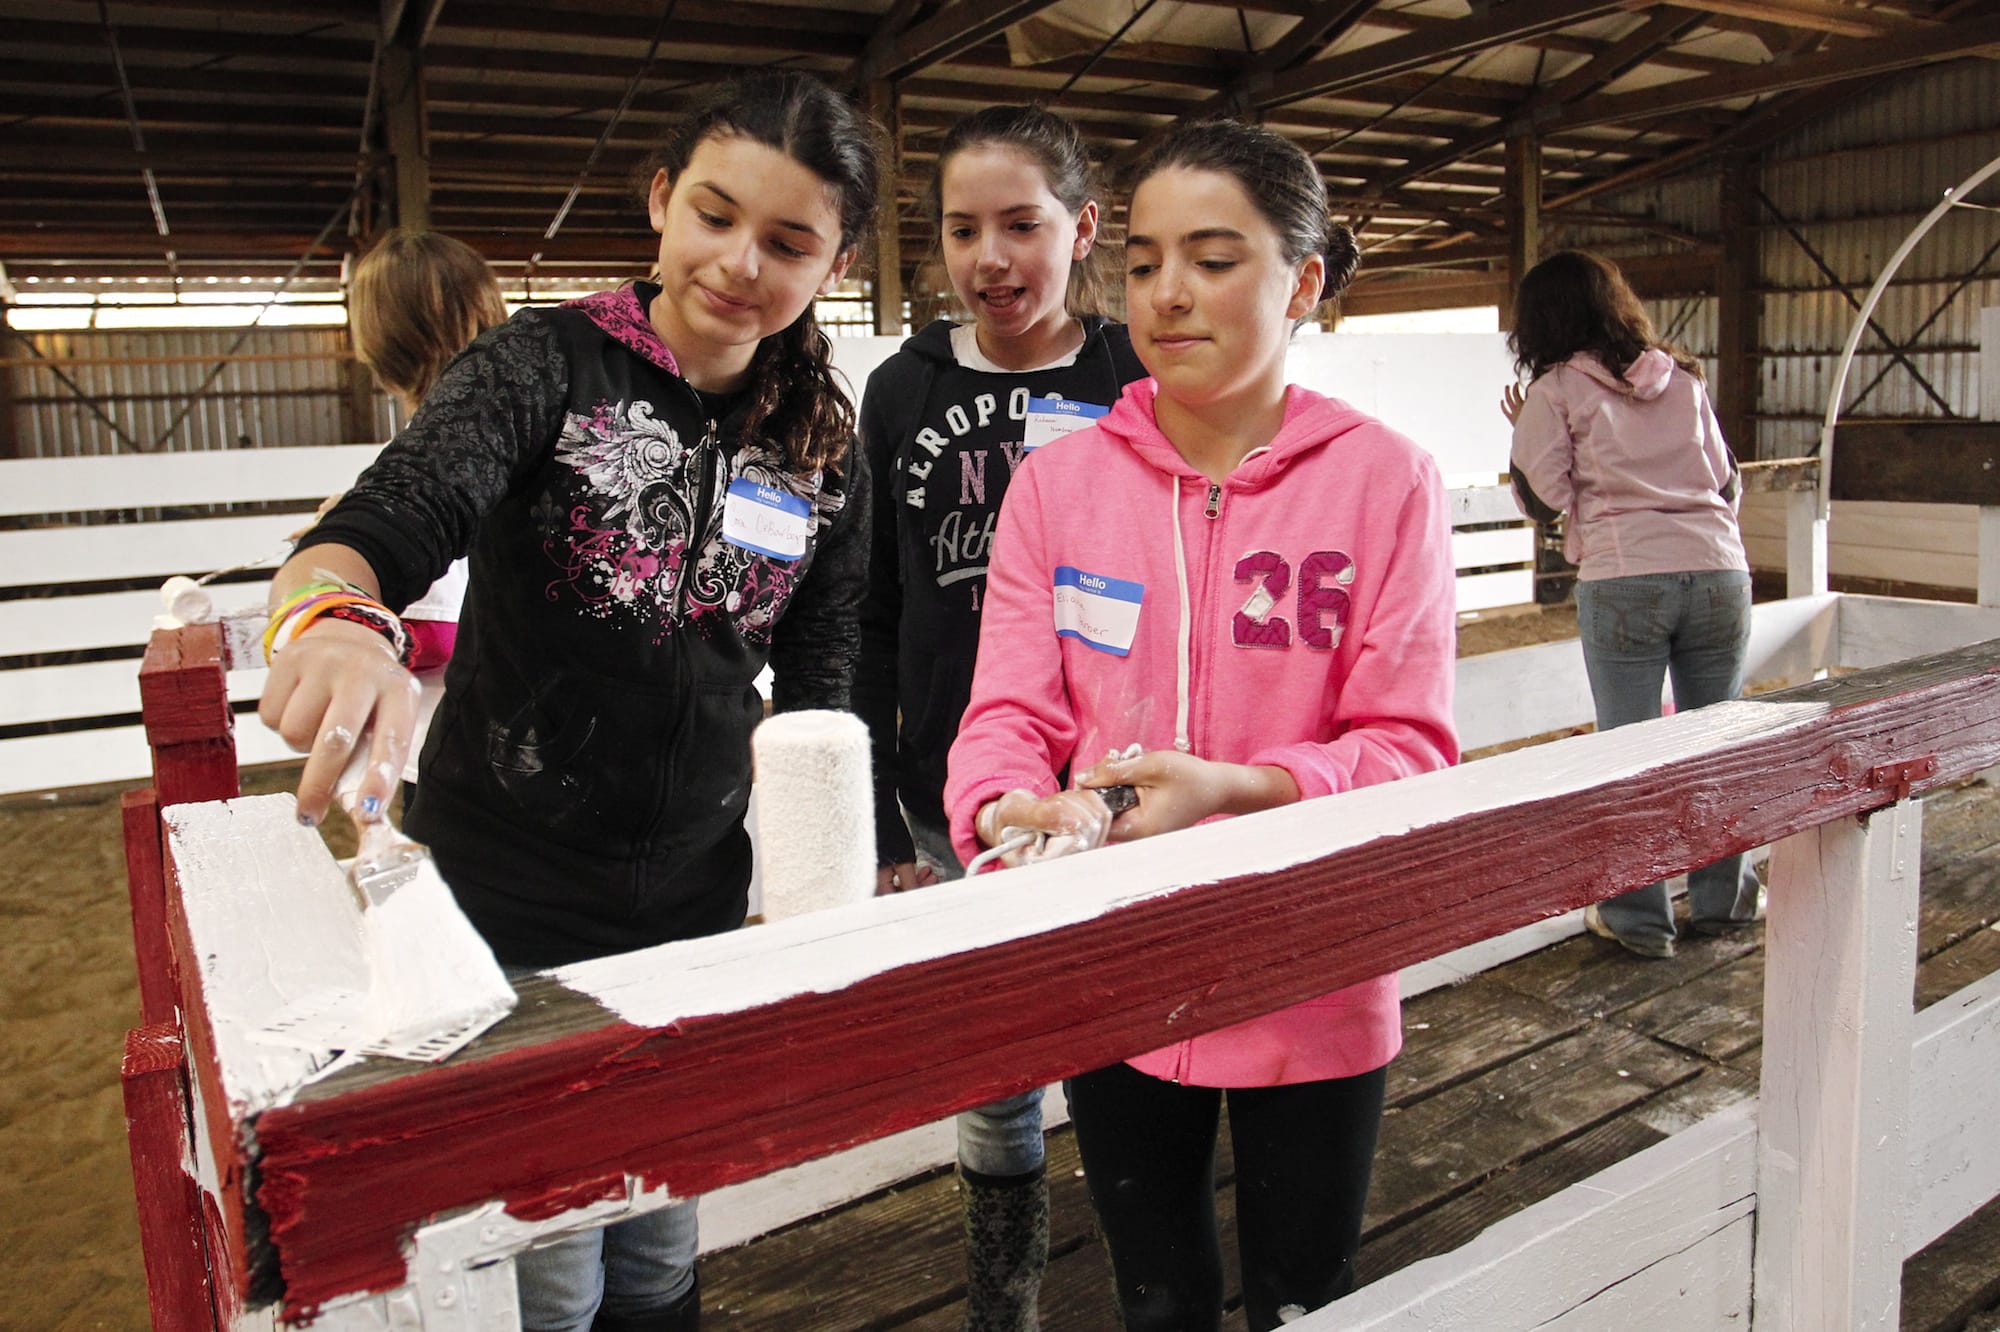 Cora DeBarber, from left, Rebecca Hembree and Eliana Farber from Vancouver School of Arts and Academics paint the walls and fences at Silver Buckle Ranch in Brush Prairie as part of the Day of Caring project.